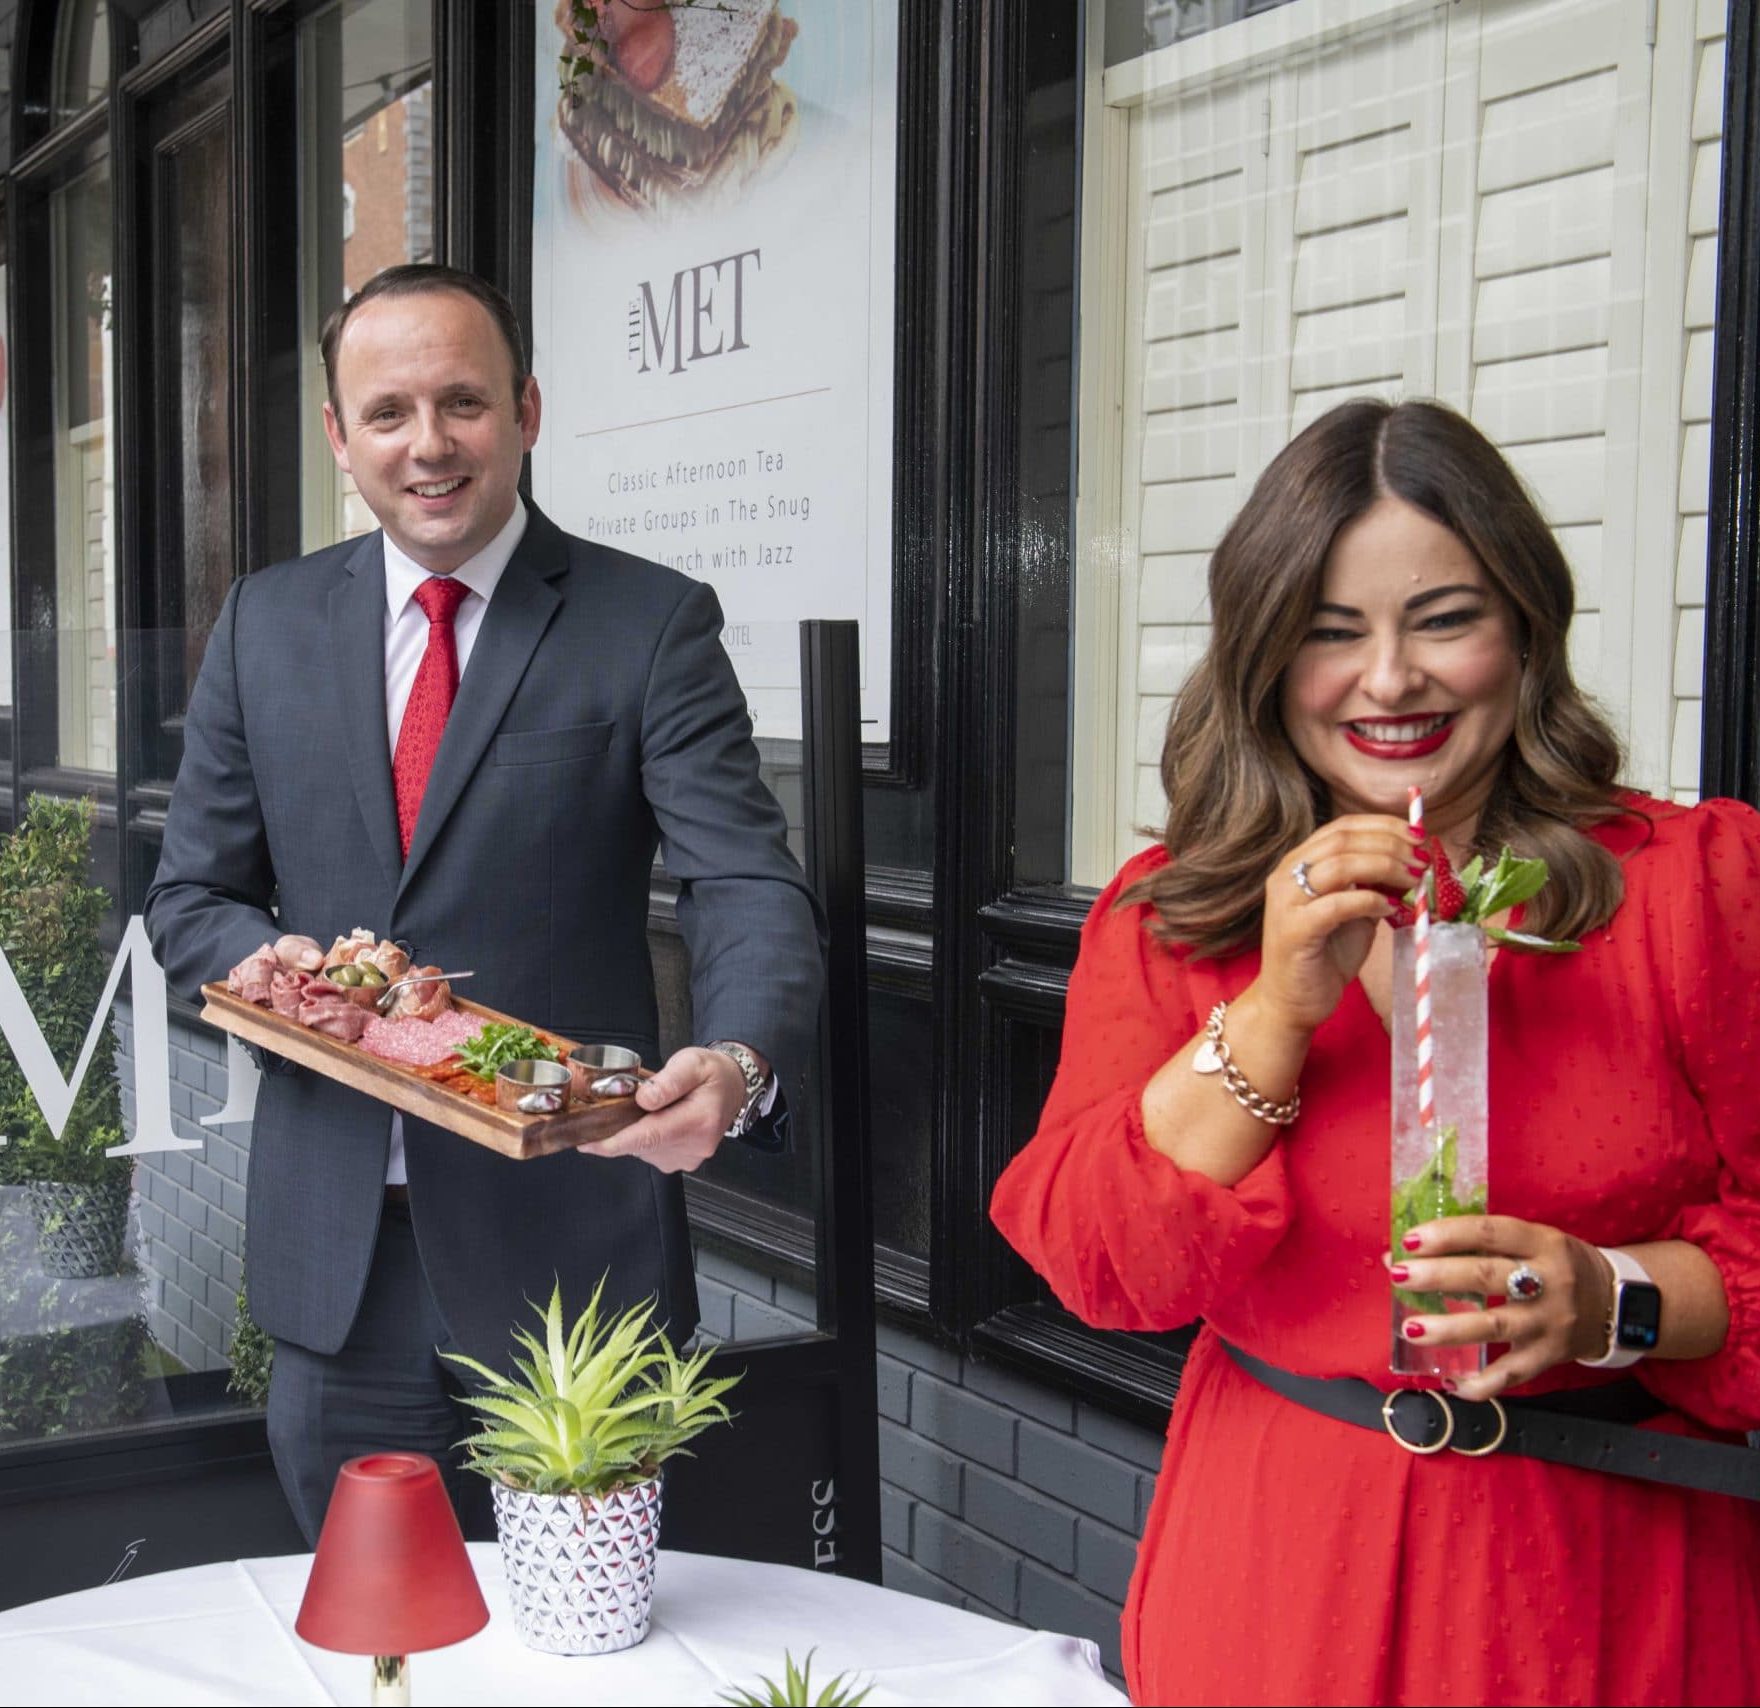 The Metropole managers showing prosecco cocktails on their outdoor terrace